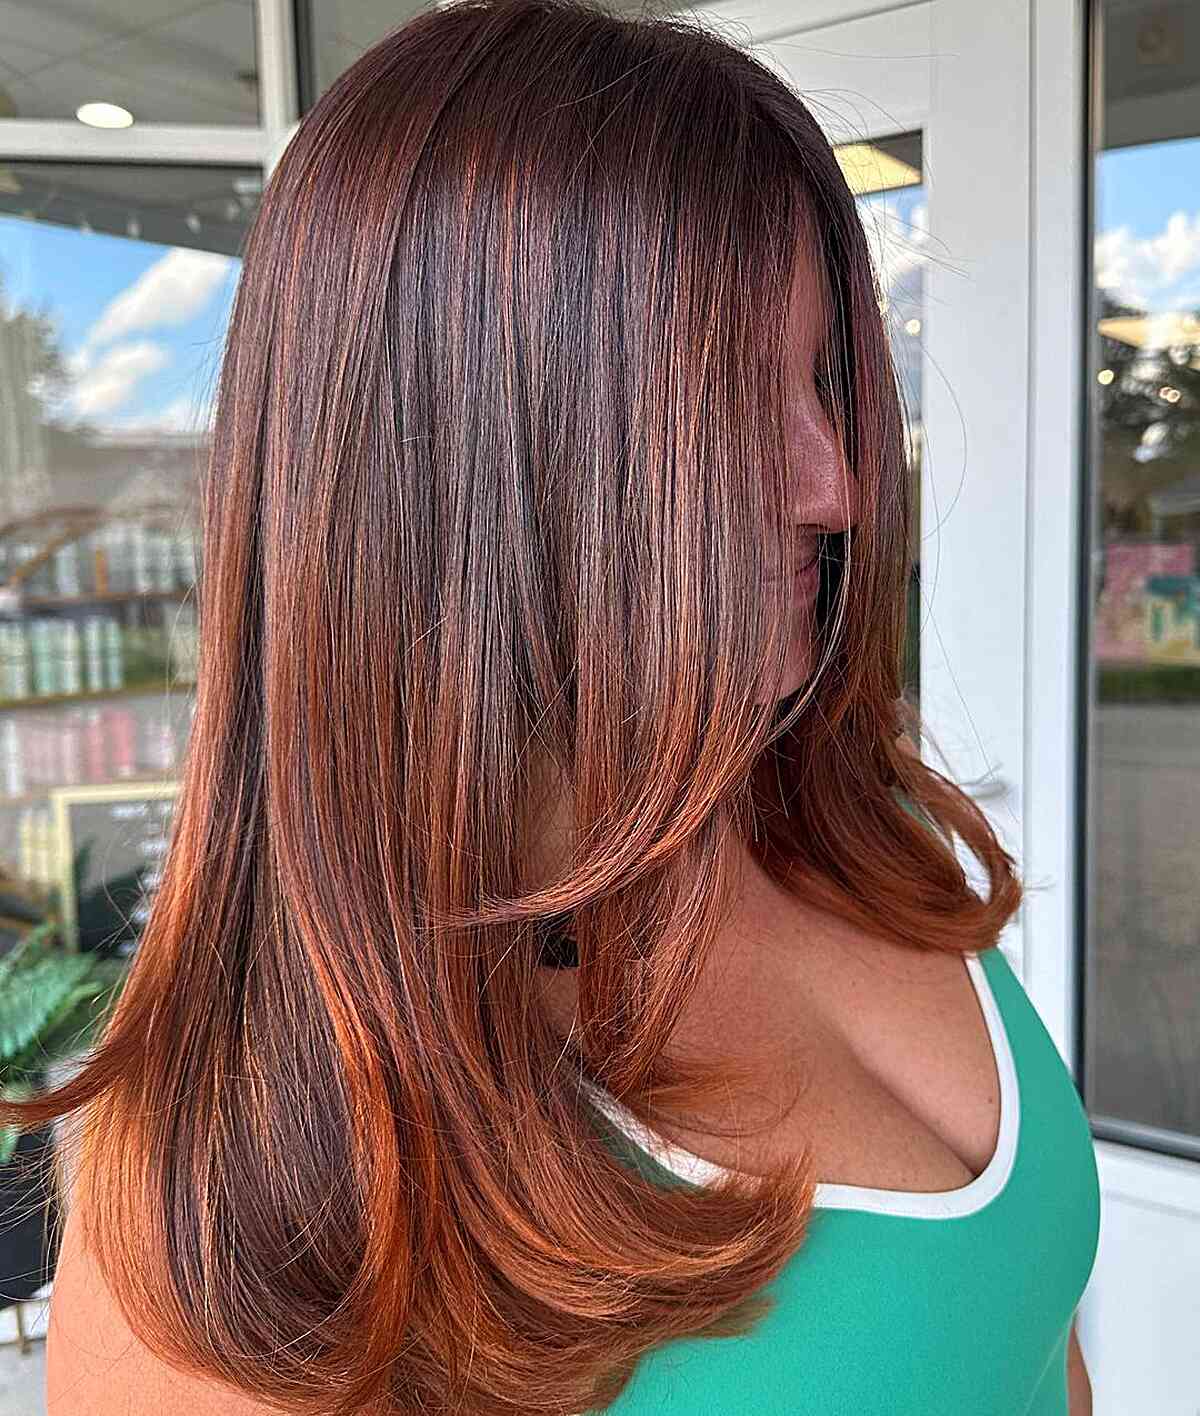 Medium-Length Copper Hair with Lighter Ends for Fall and Mature Ladies Aged 40